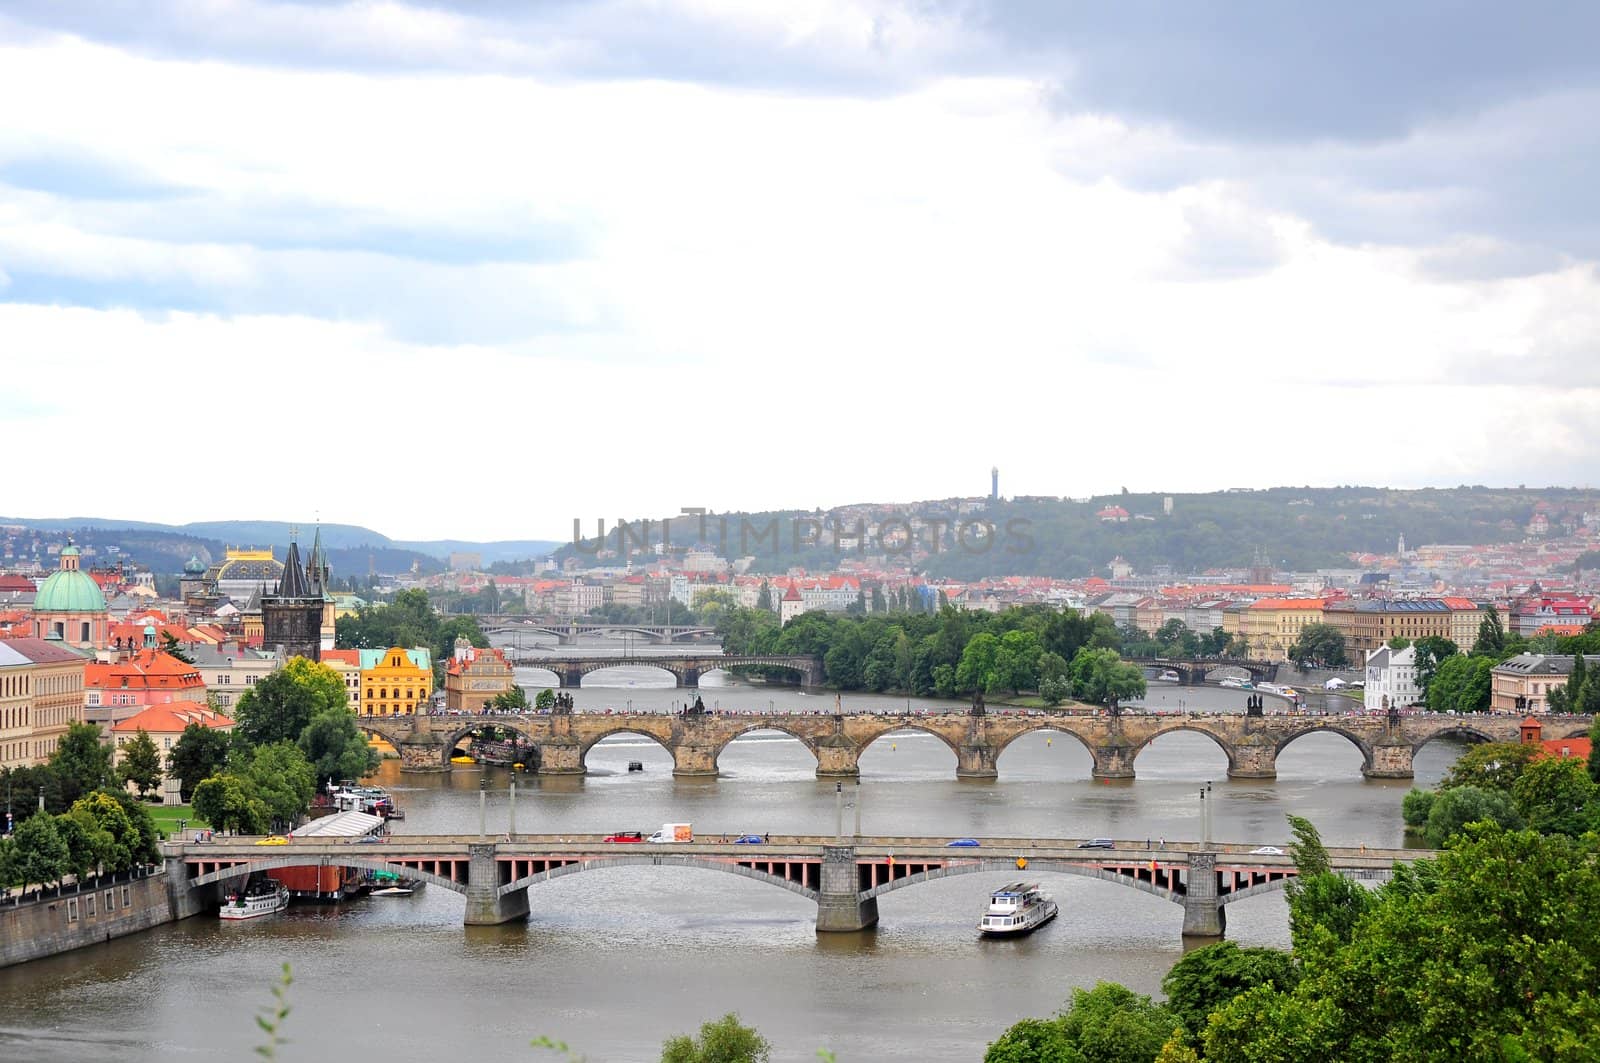 Panoramic view of Prague from the Letna Gardens on a rainy day